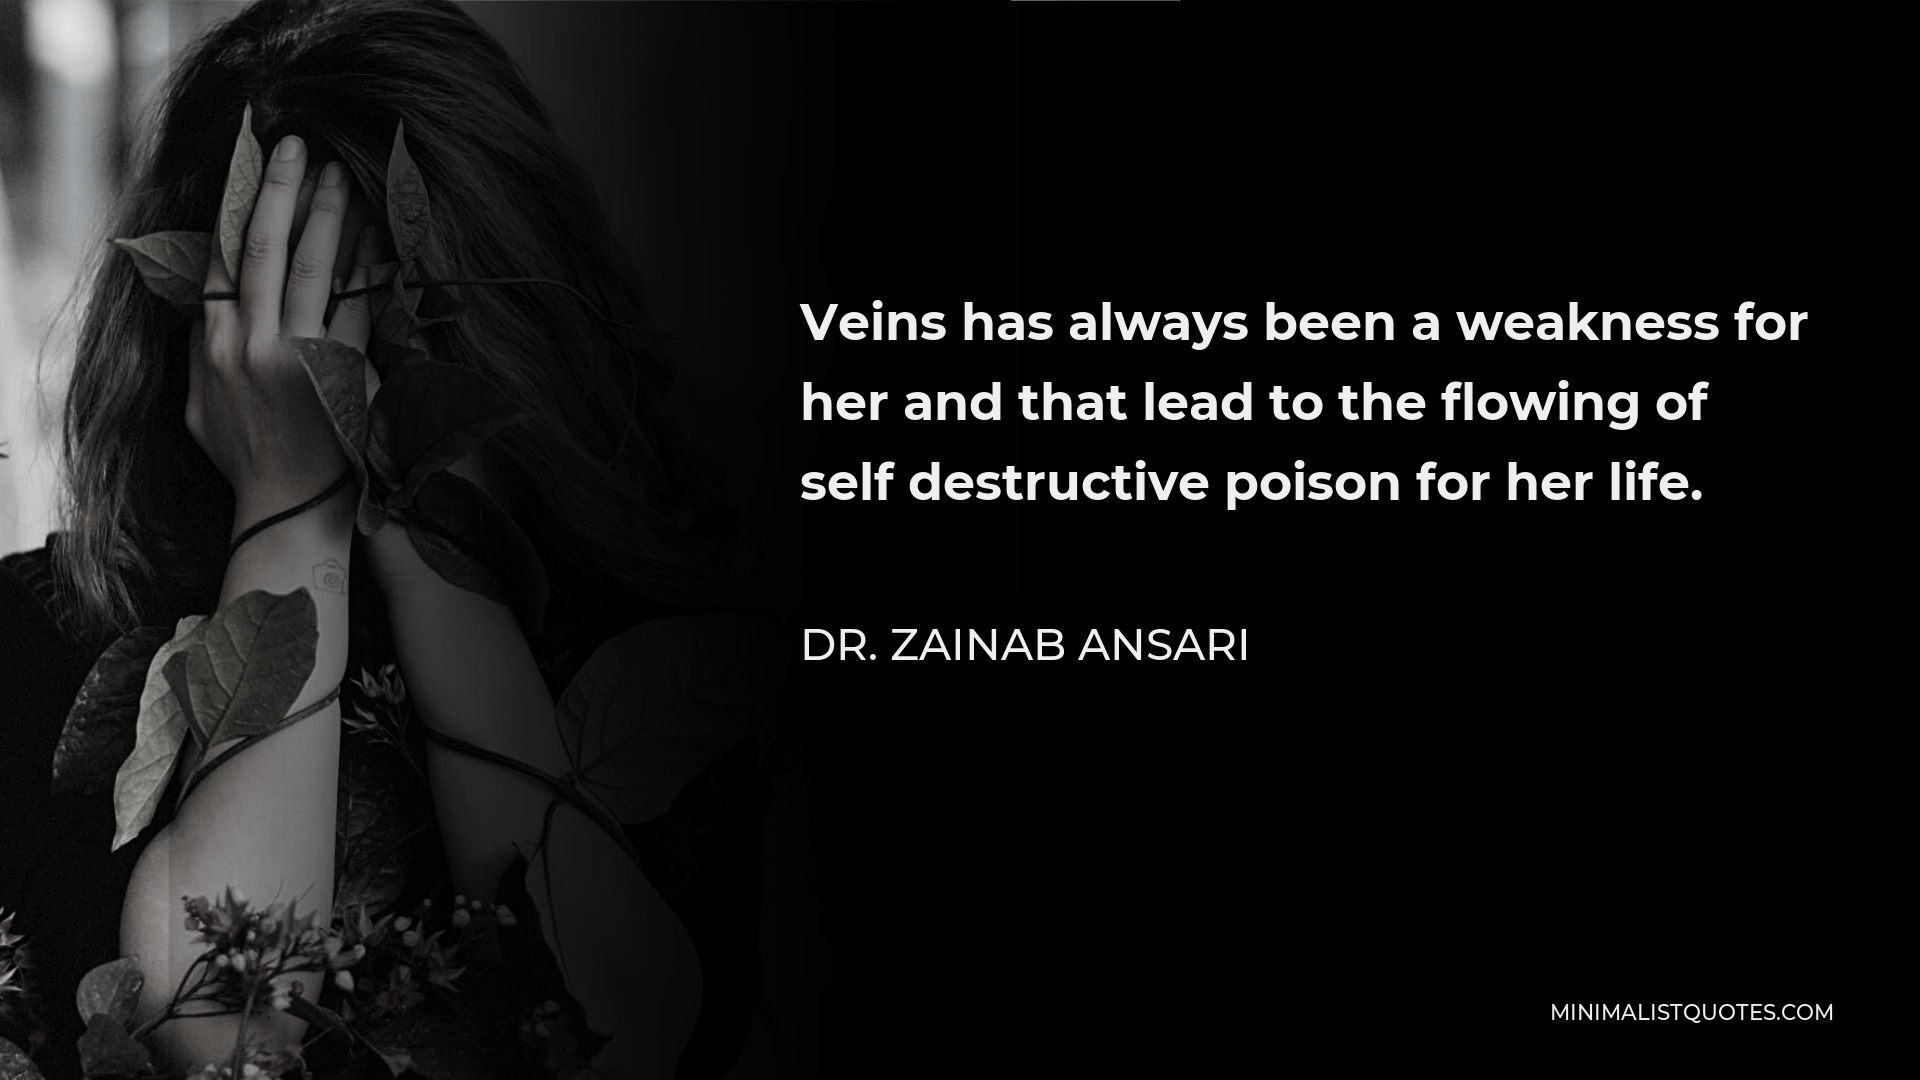 Dr. Zainab Ansari Quote - Veins has always been a weakness for her and that lead to the flowing of self destructive poison for her life.